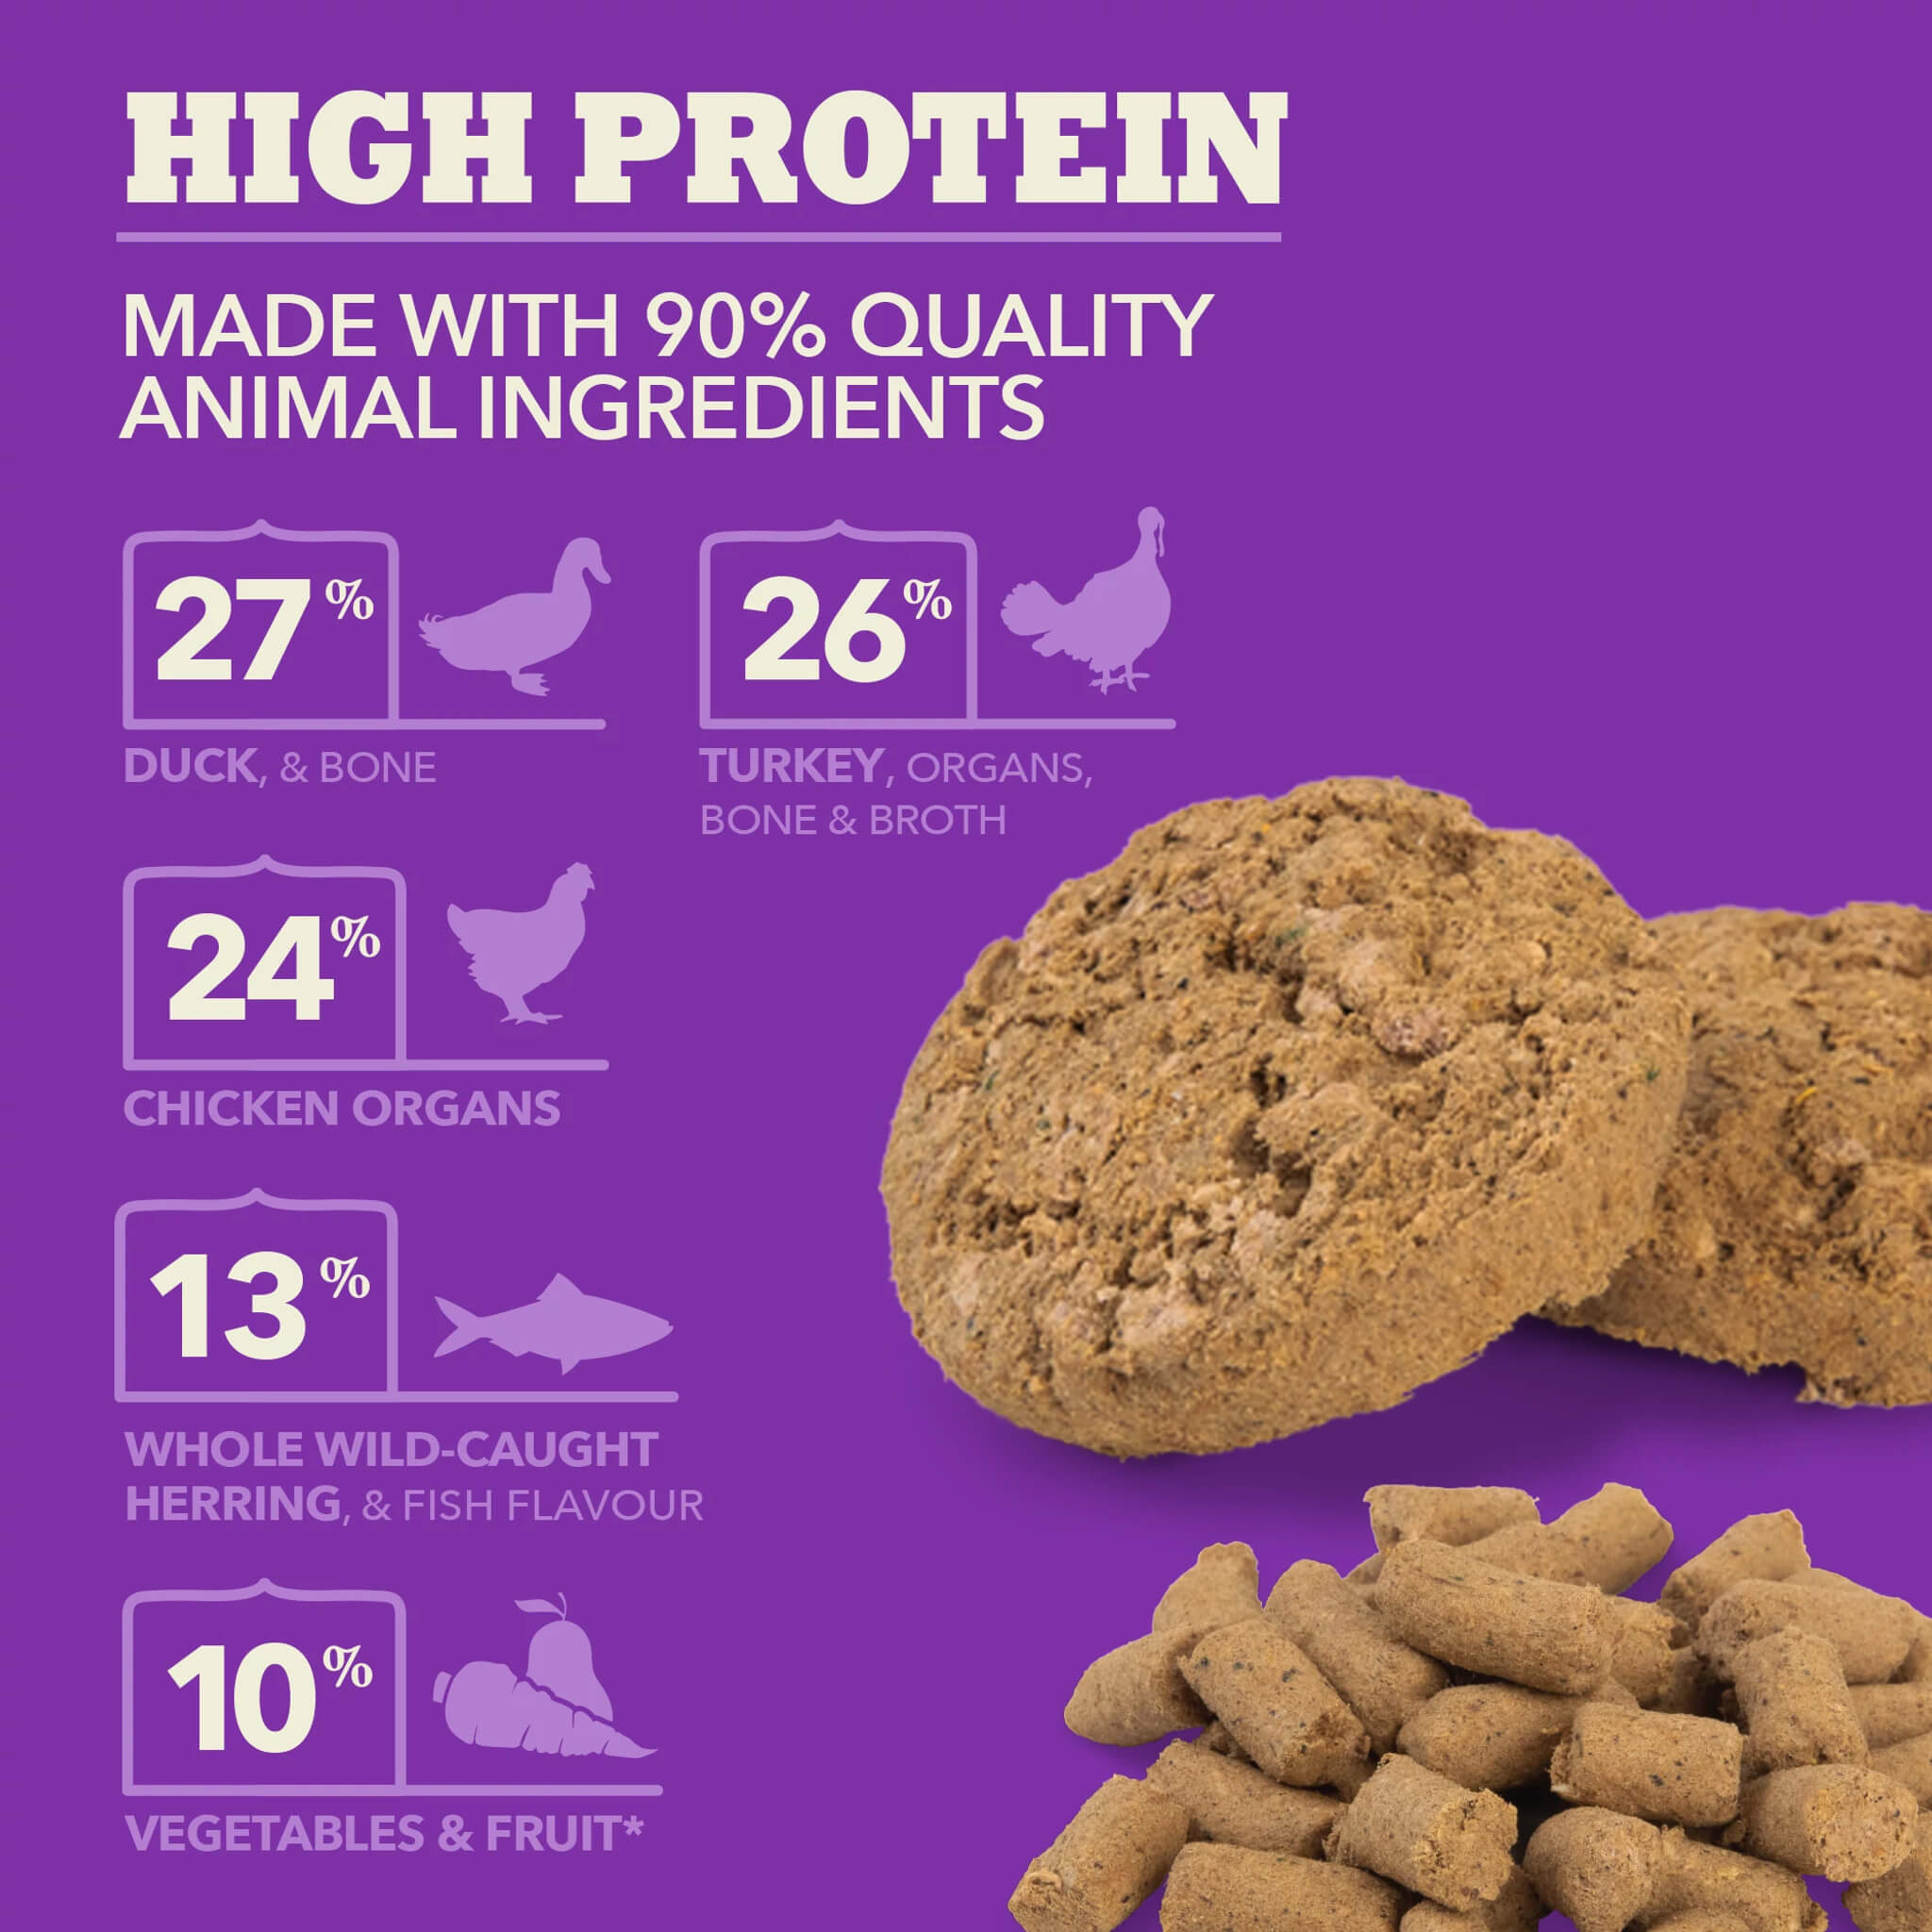 High protein - made with 90% quality animal ingredients